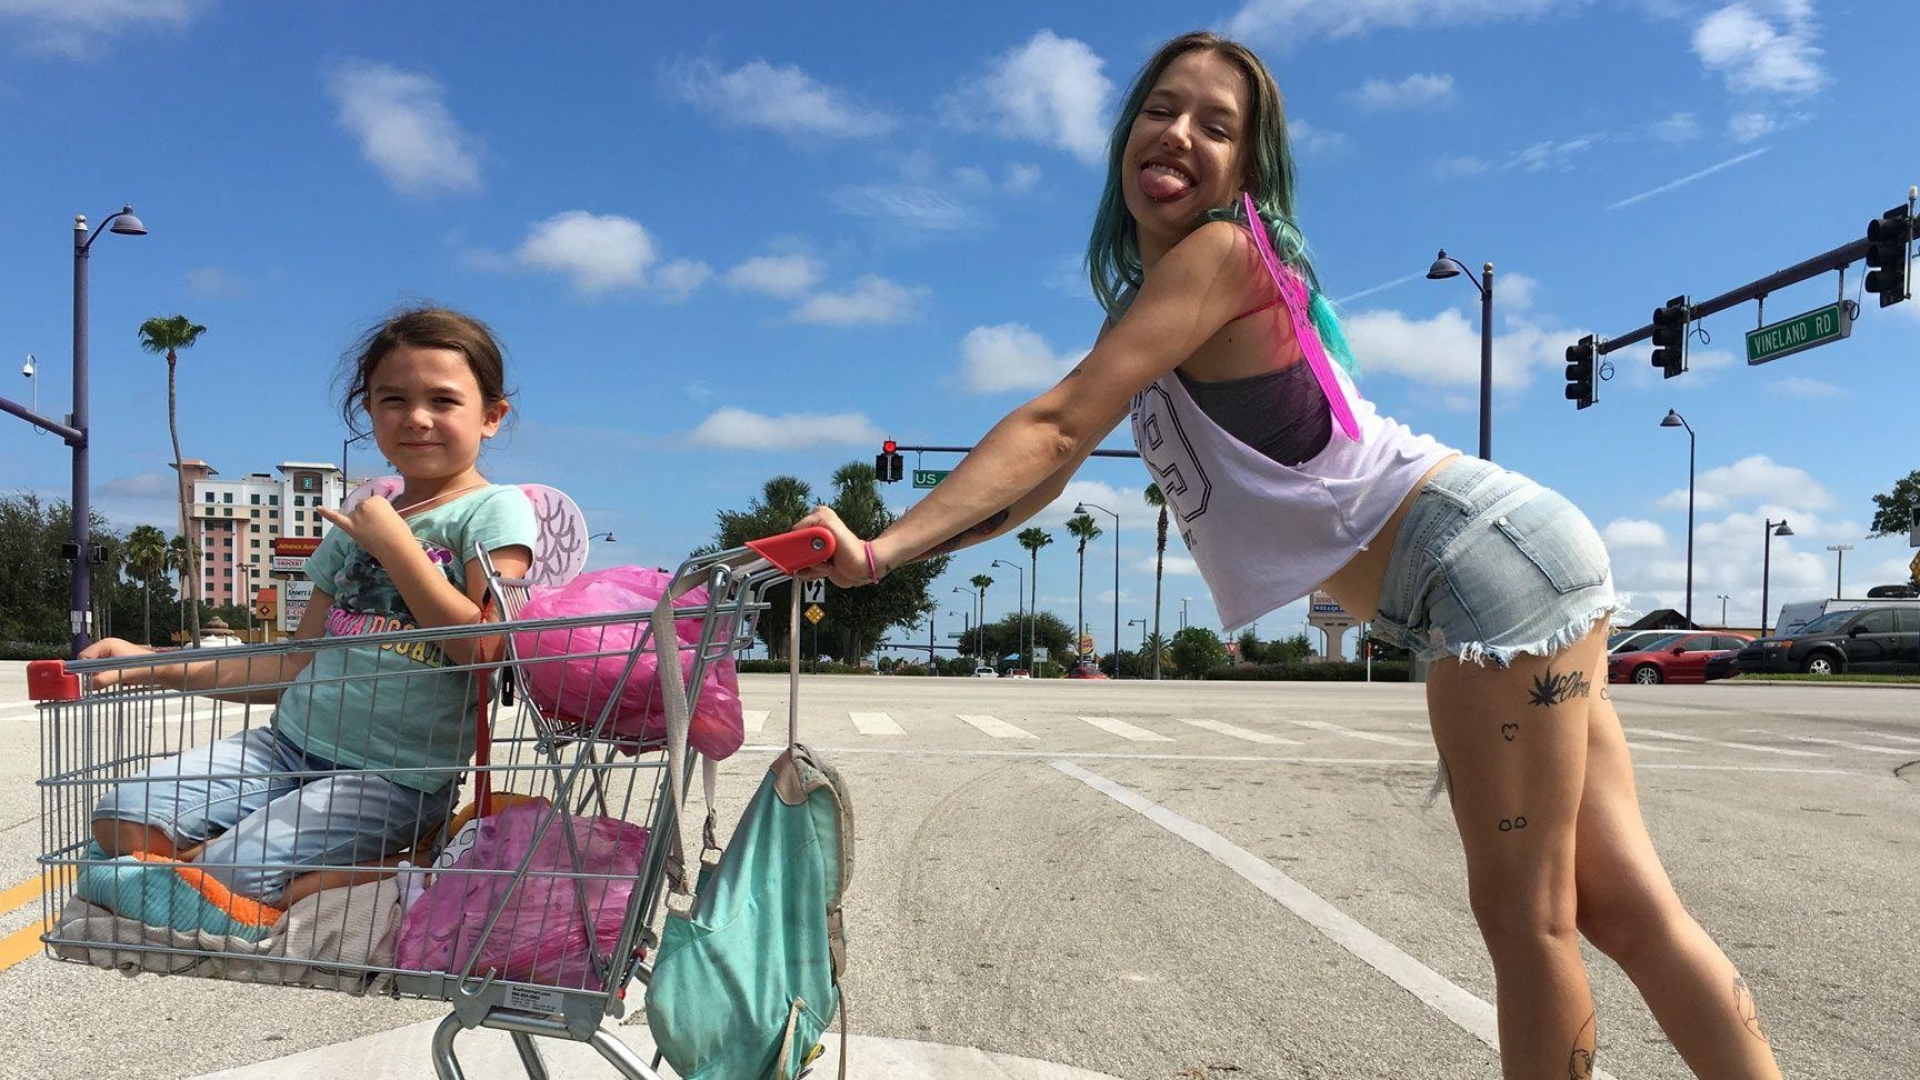 The Florida Project, Independent film, Childhood innocence, Poverty, 1920x1080 Full HD Desktop